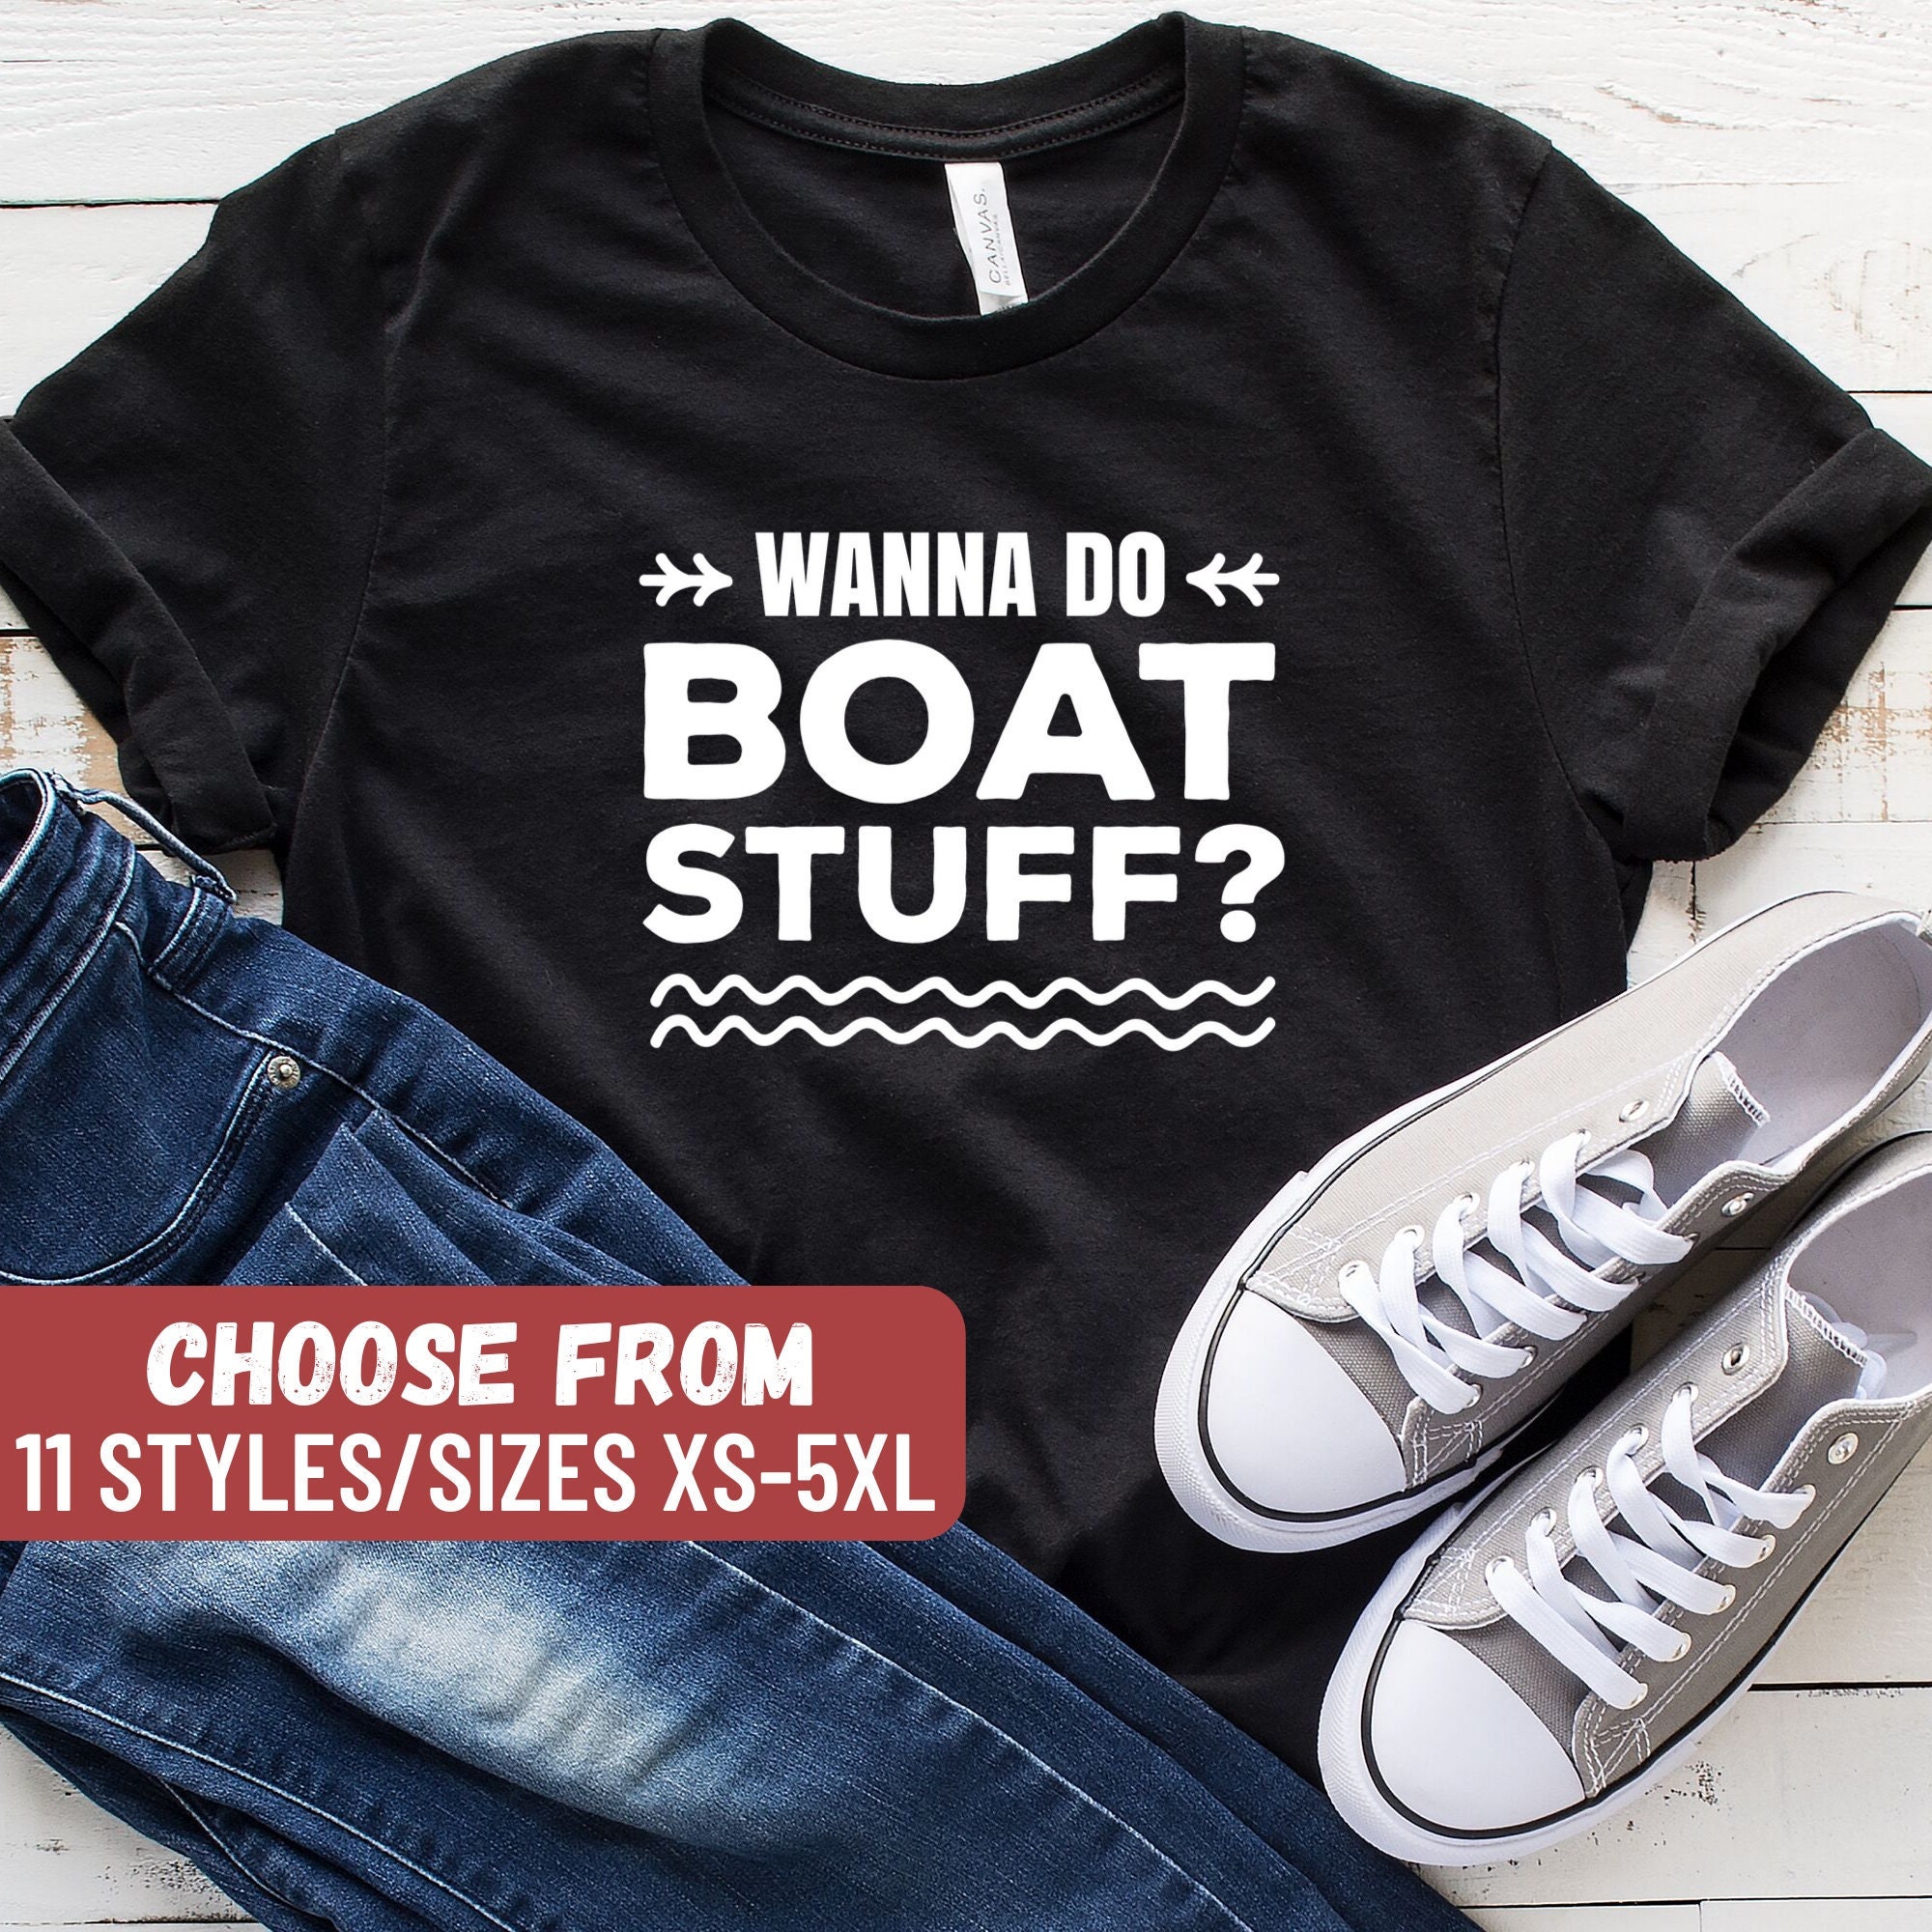 Gift For Boat Owner, Gift For Boat Captain, Funny Boating Shirt, Boat Owners Gift, Gift For Sailing, Wanna Do Boat Stuff T-Shirt